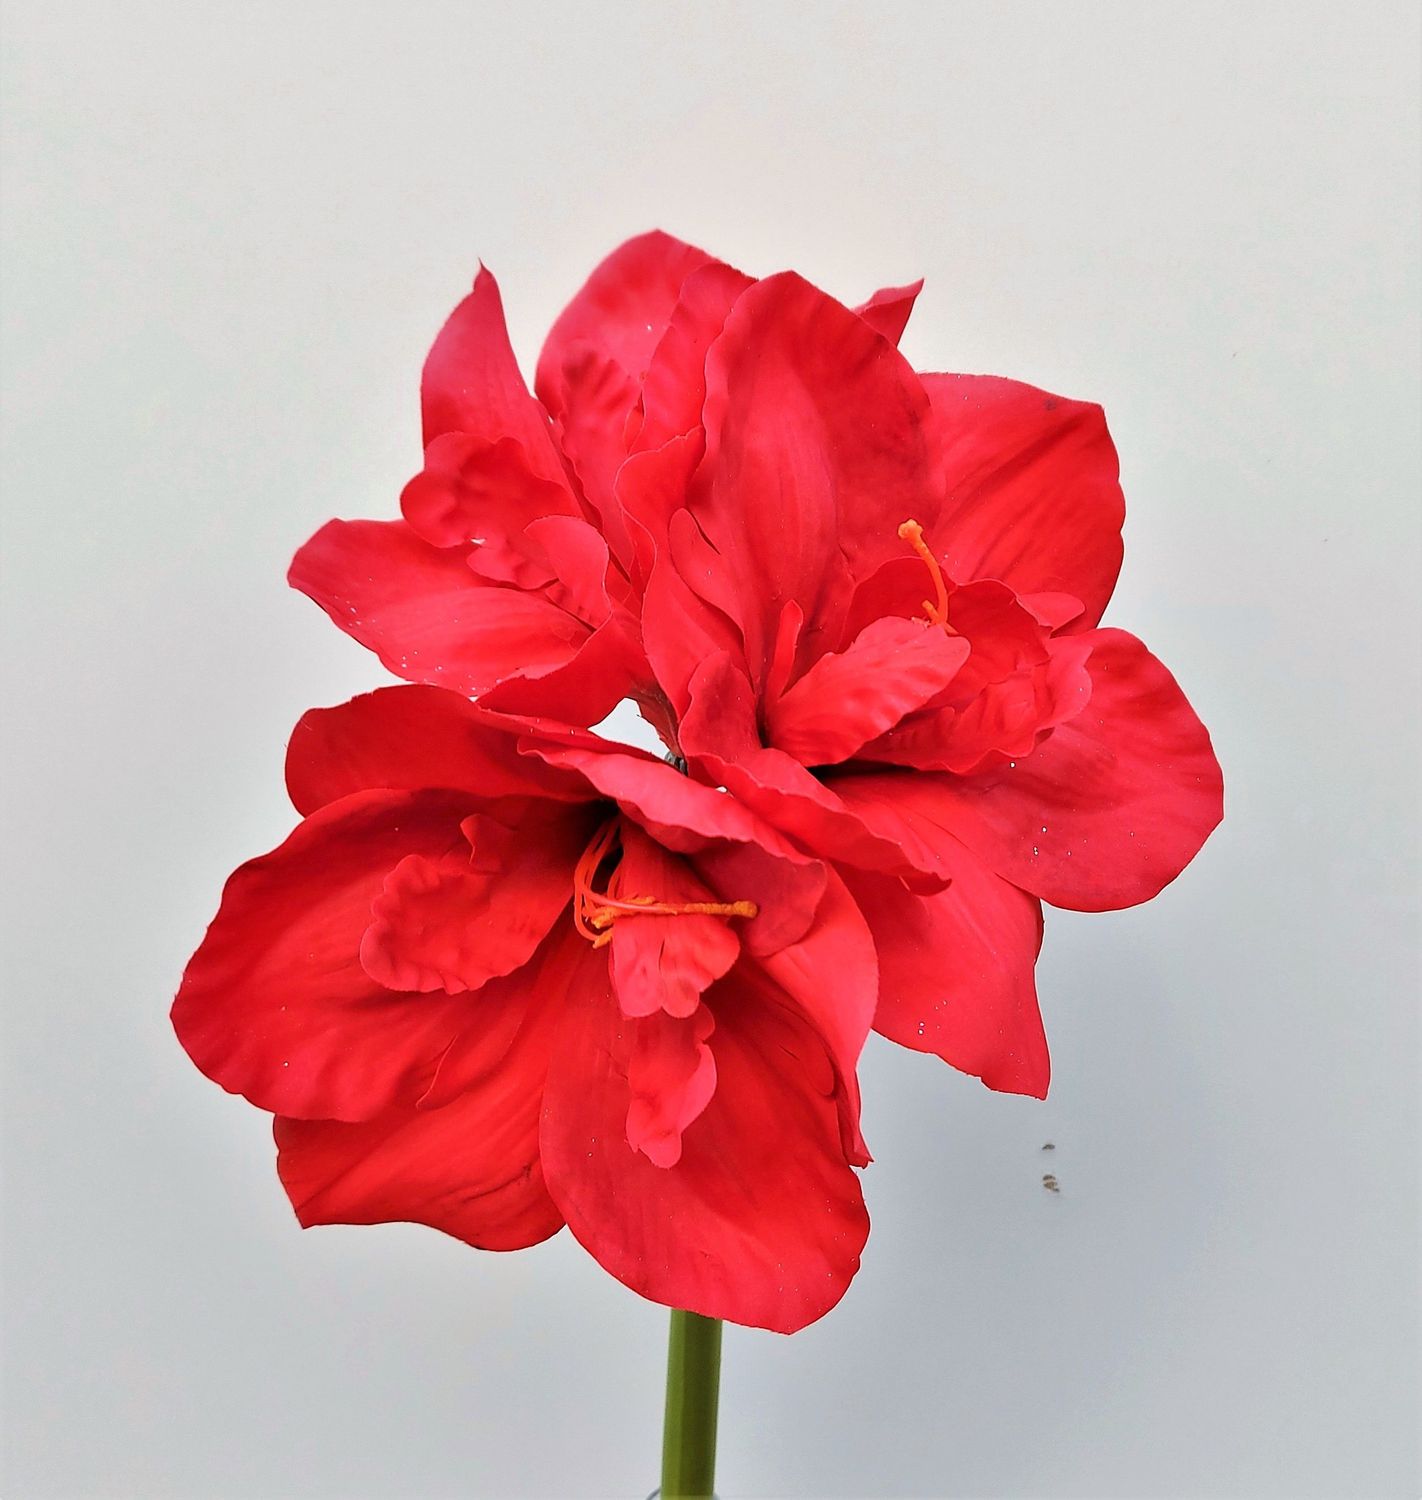 Amaryllis artificiale "Deluxe", 61 cm, rosso